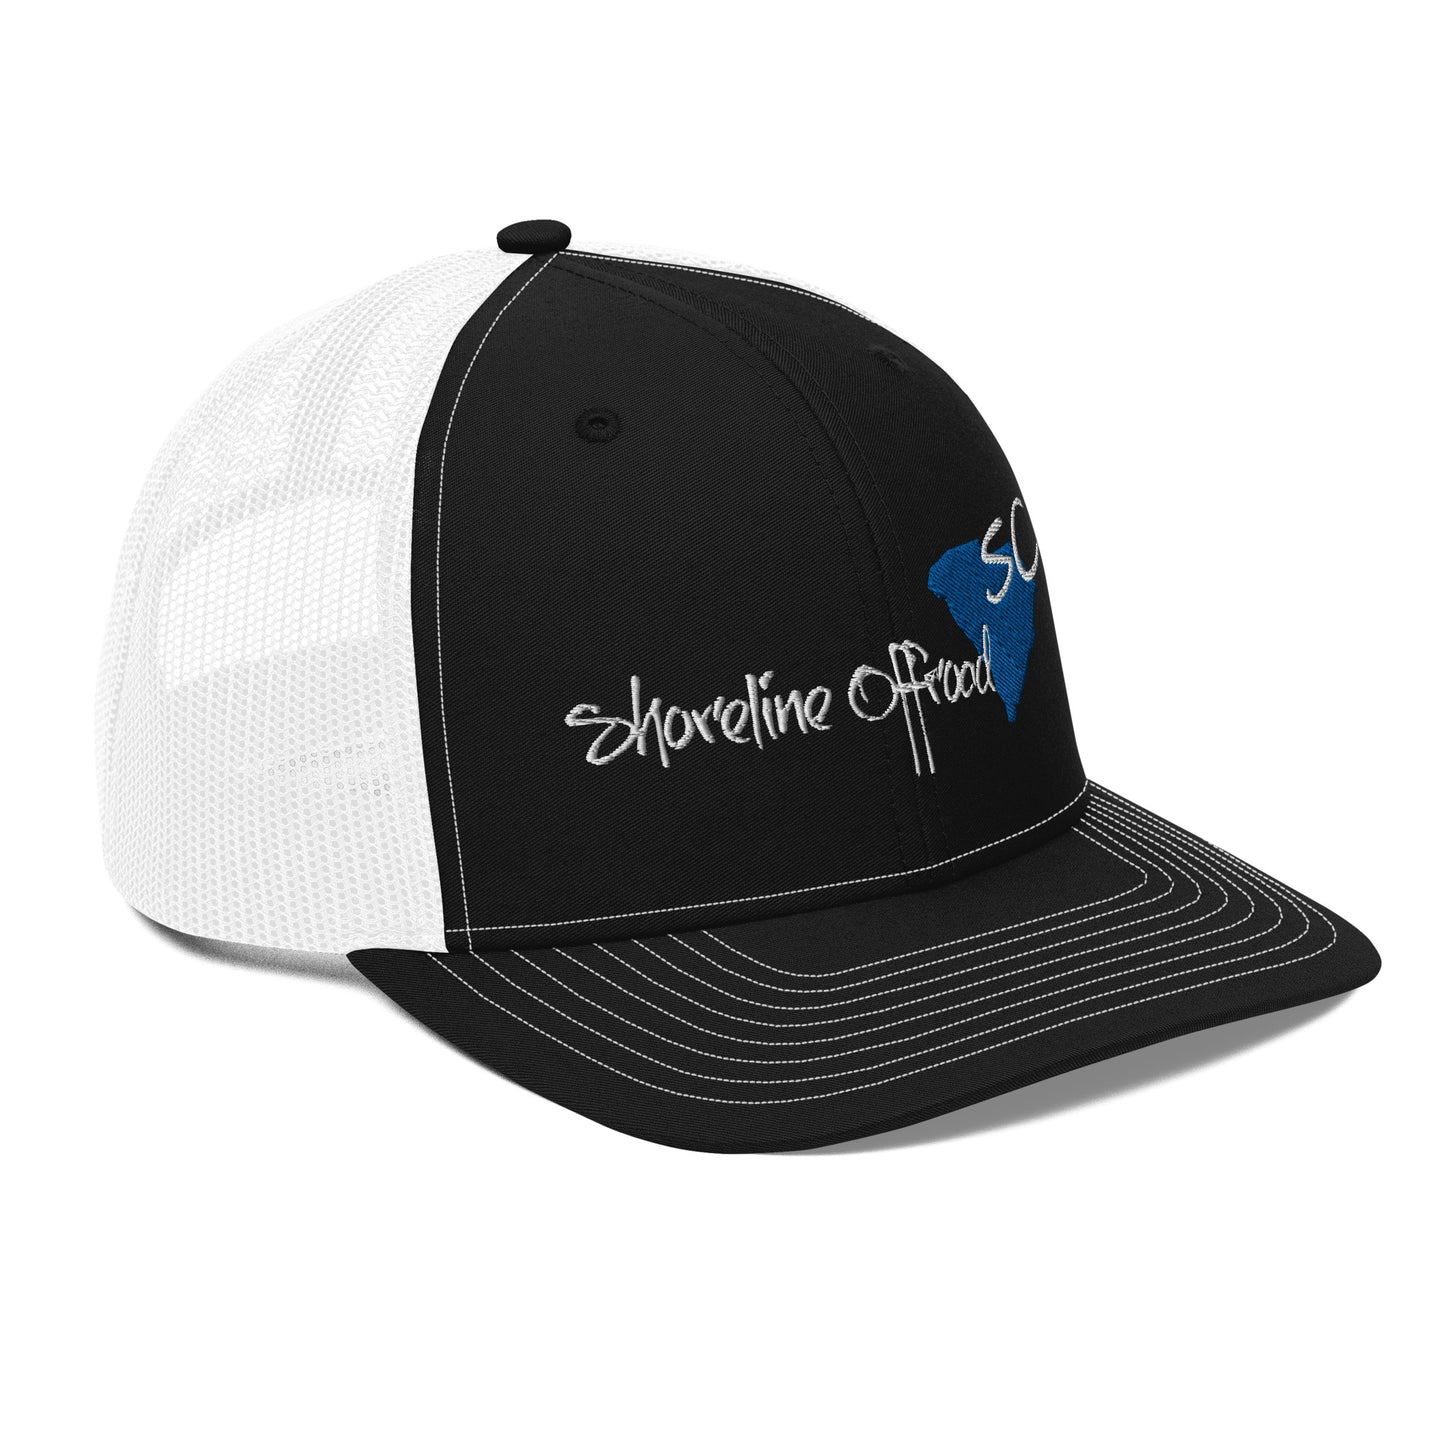 a black and white trucker hat with a blue bird on it